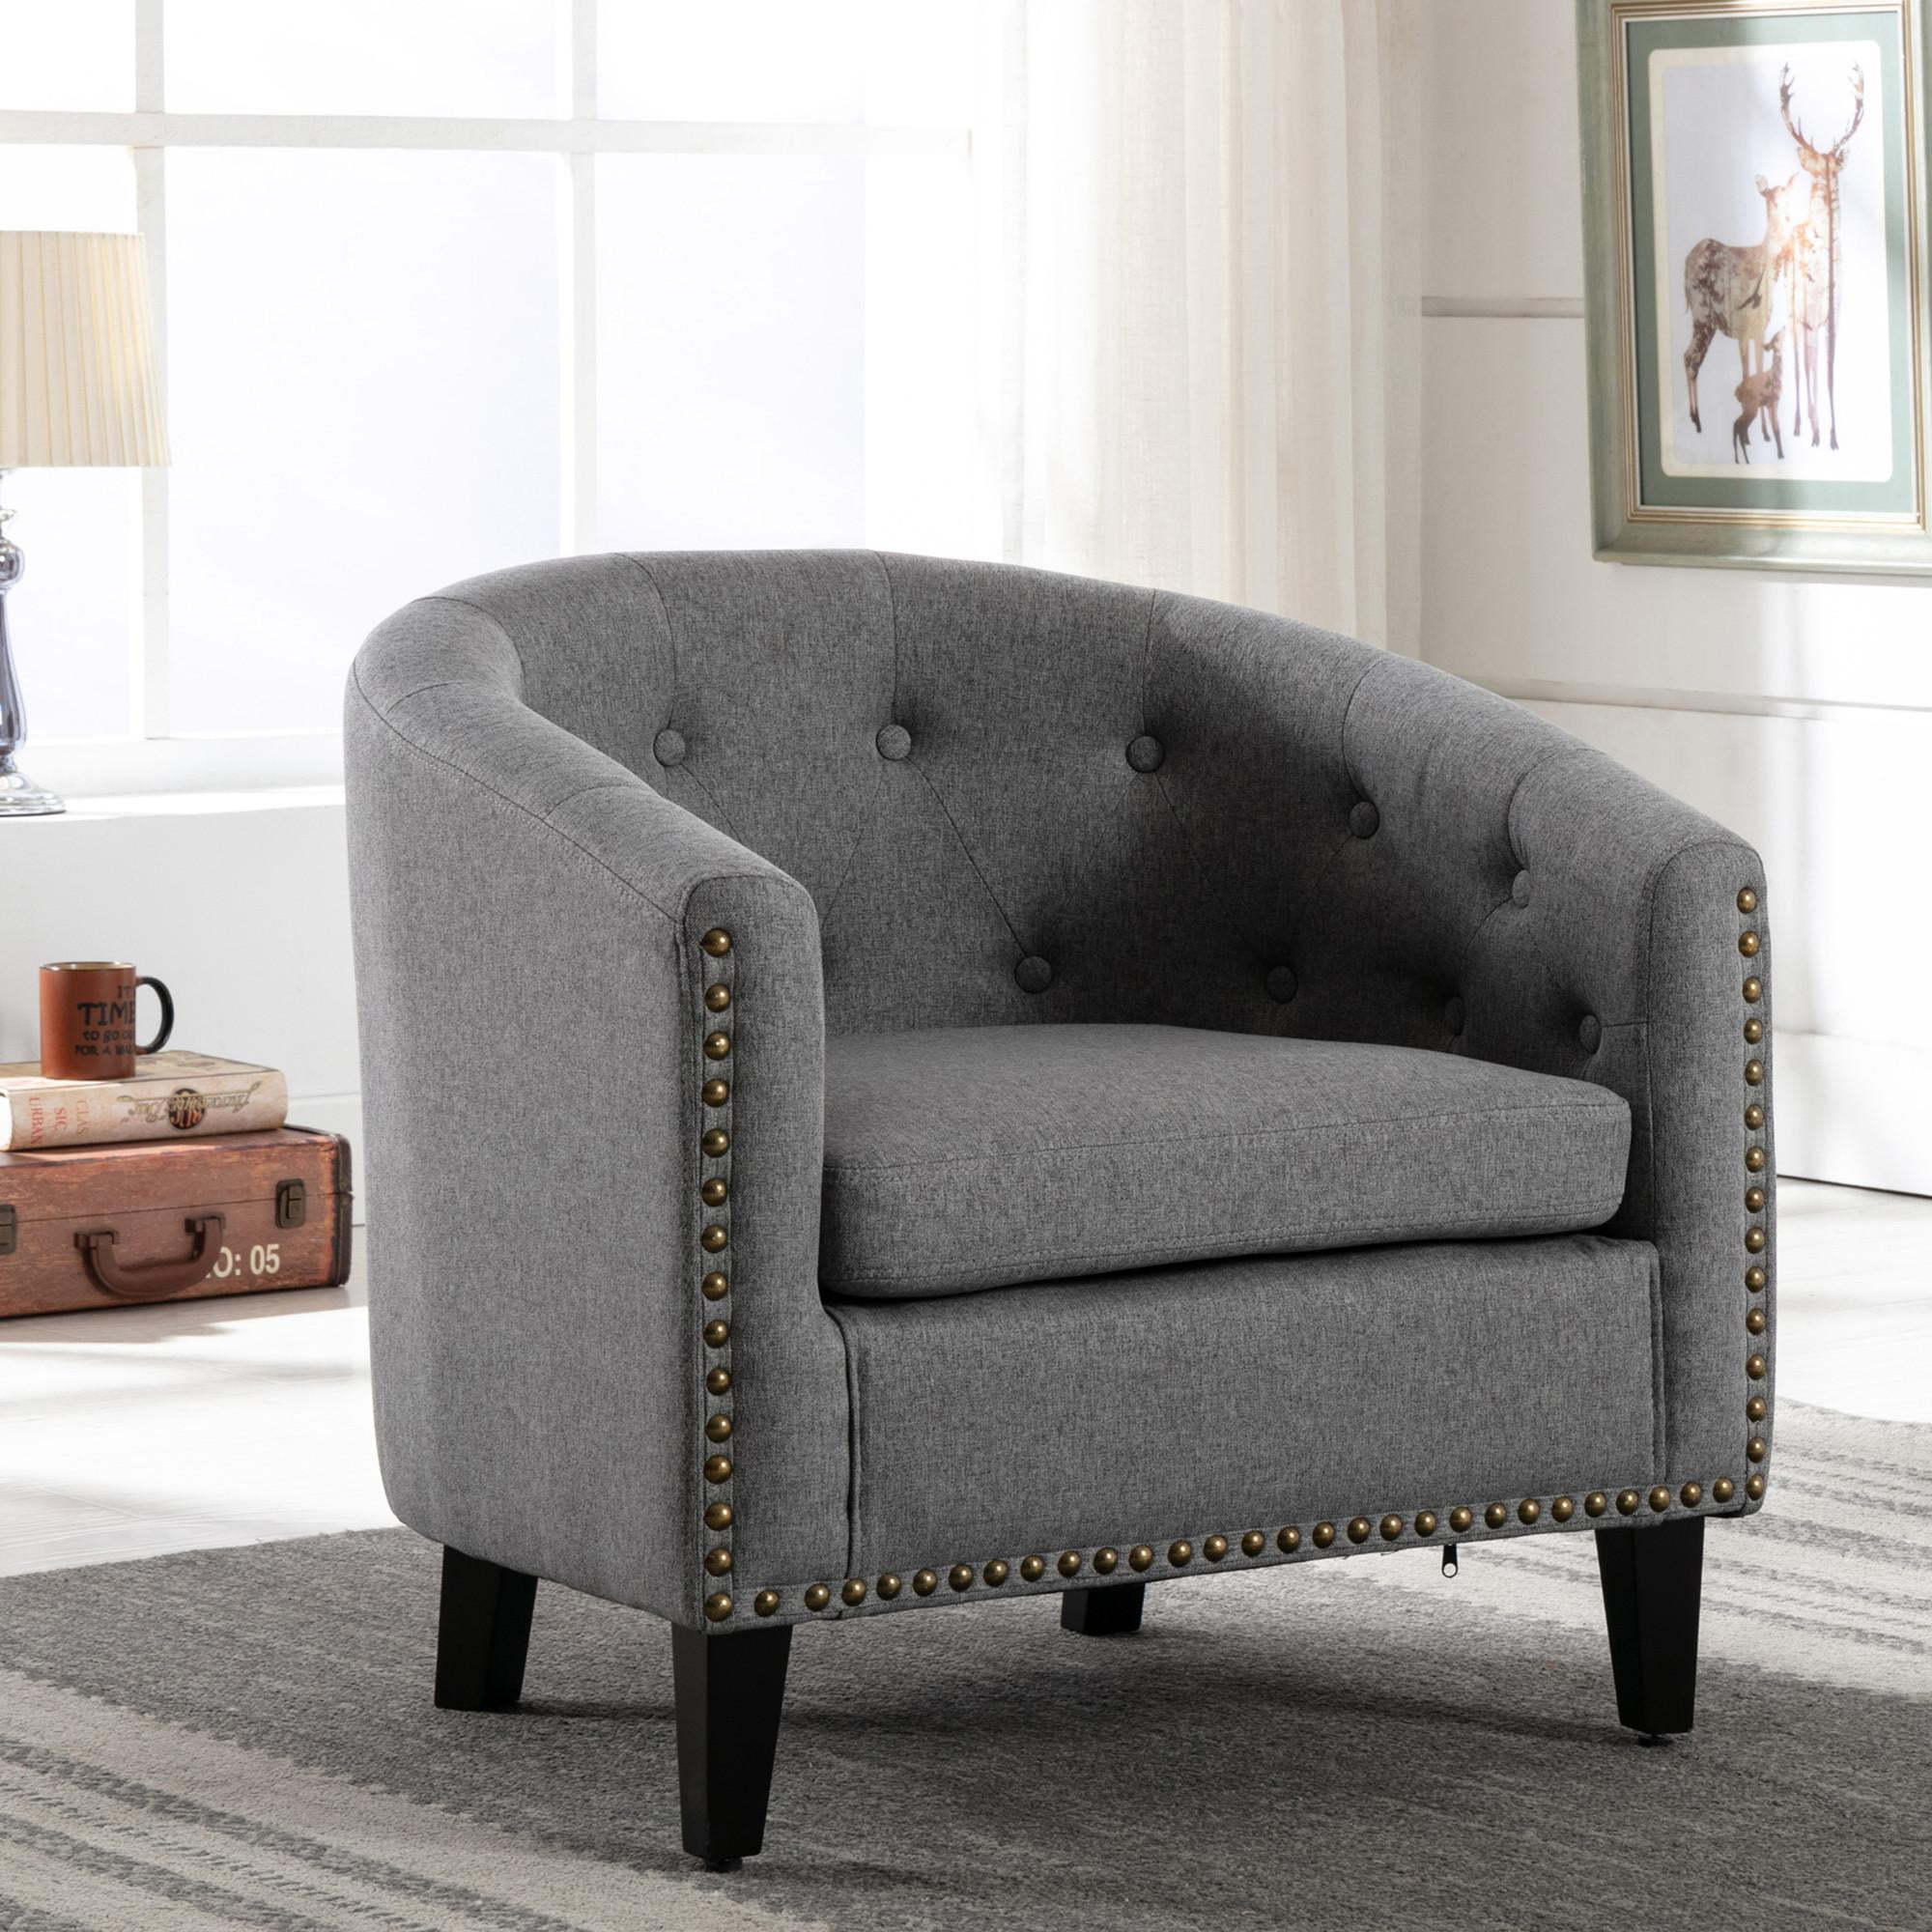 Linen Fabric Accent Chair for Living Room Bedroon, Modern Tufted